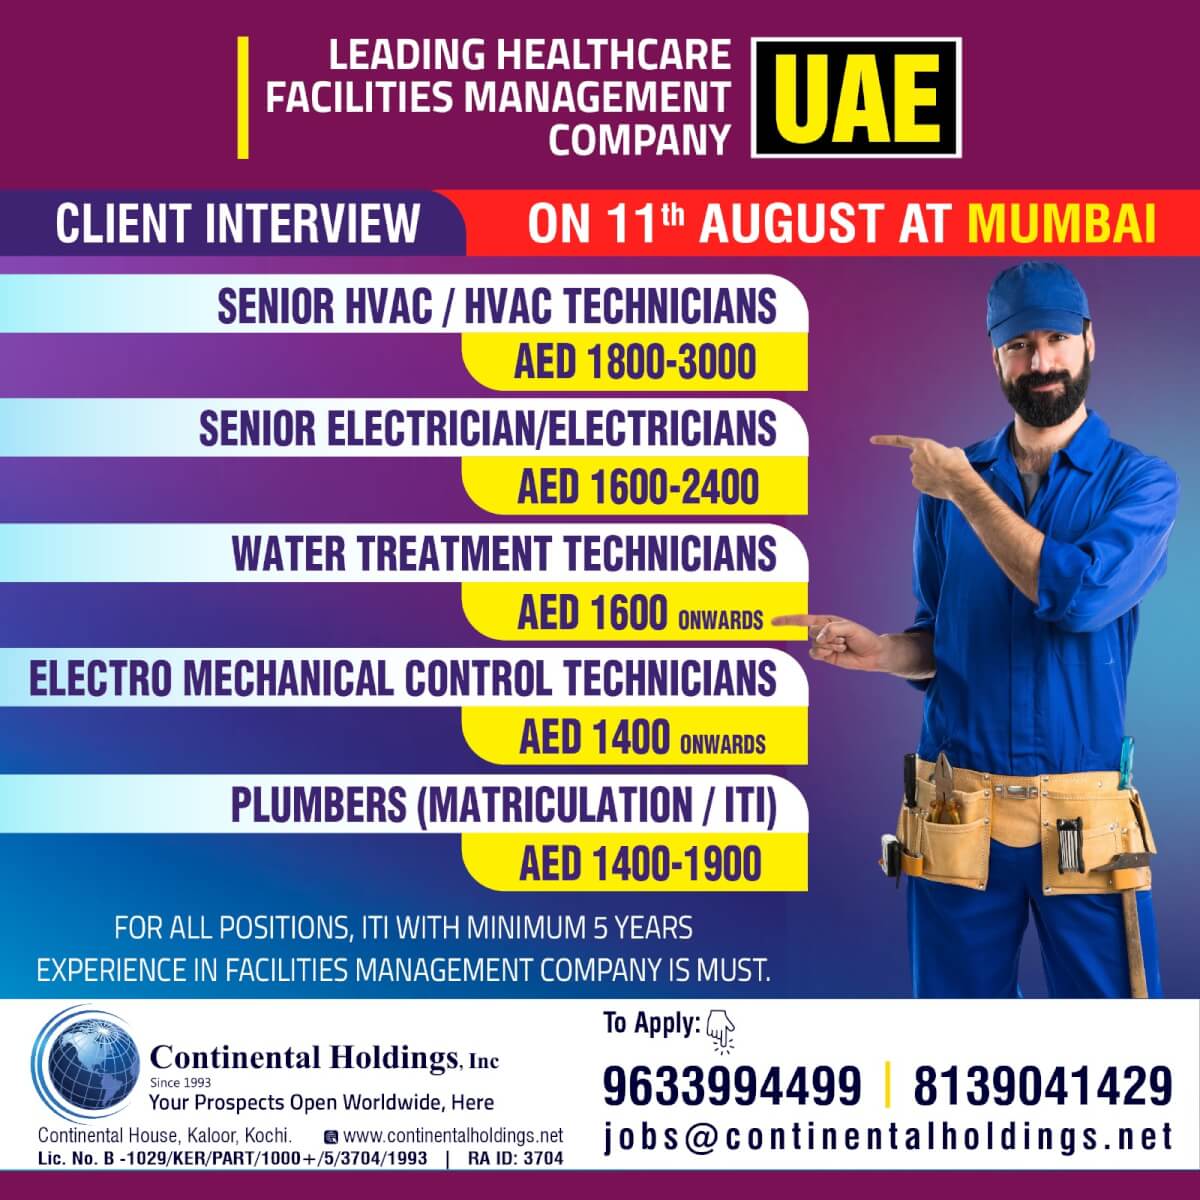 Hiring for UAE - Facility Managment - Direct Client Interview at MUMBAI